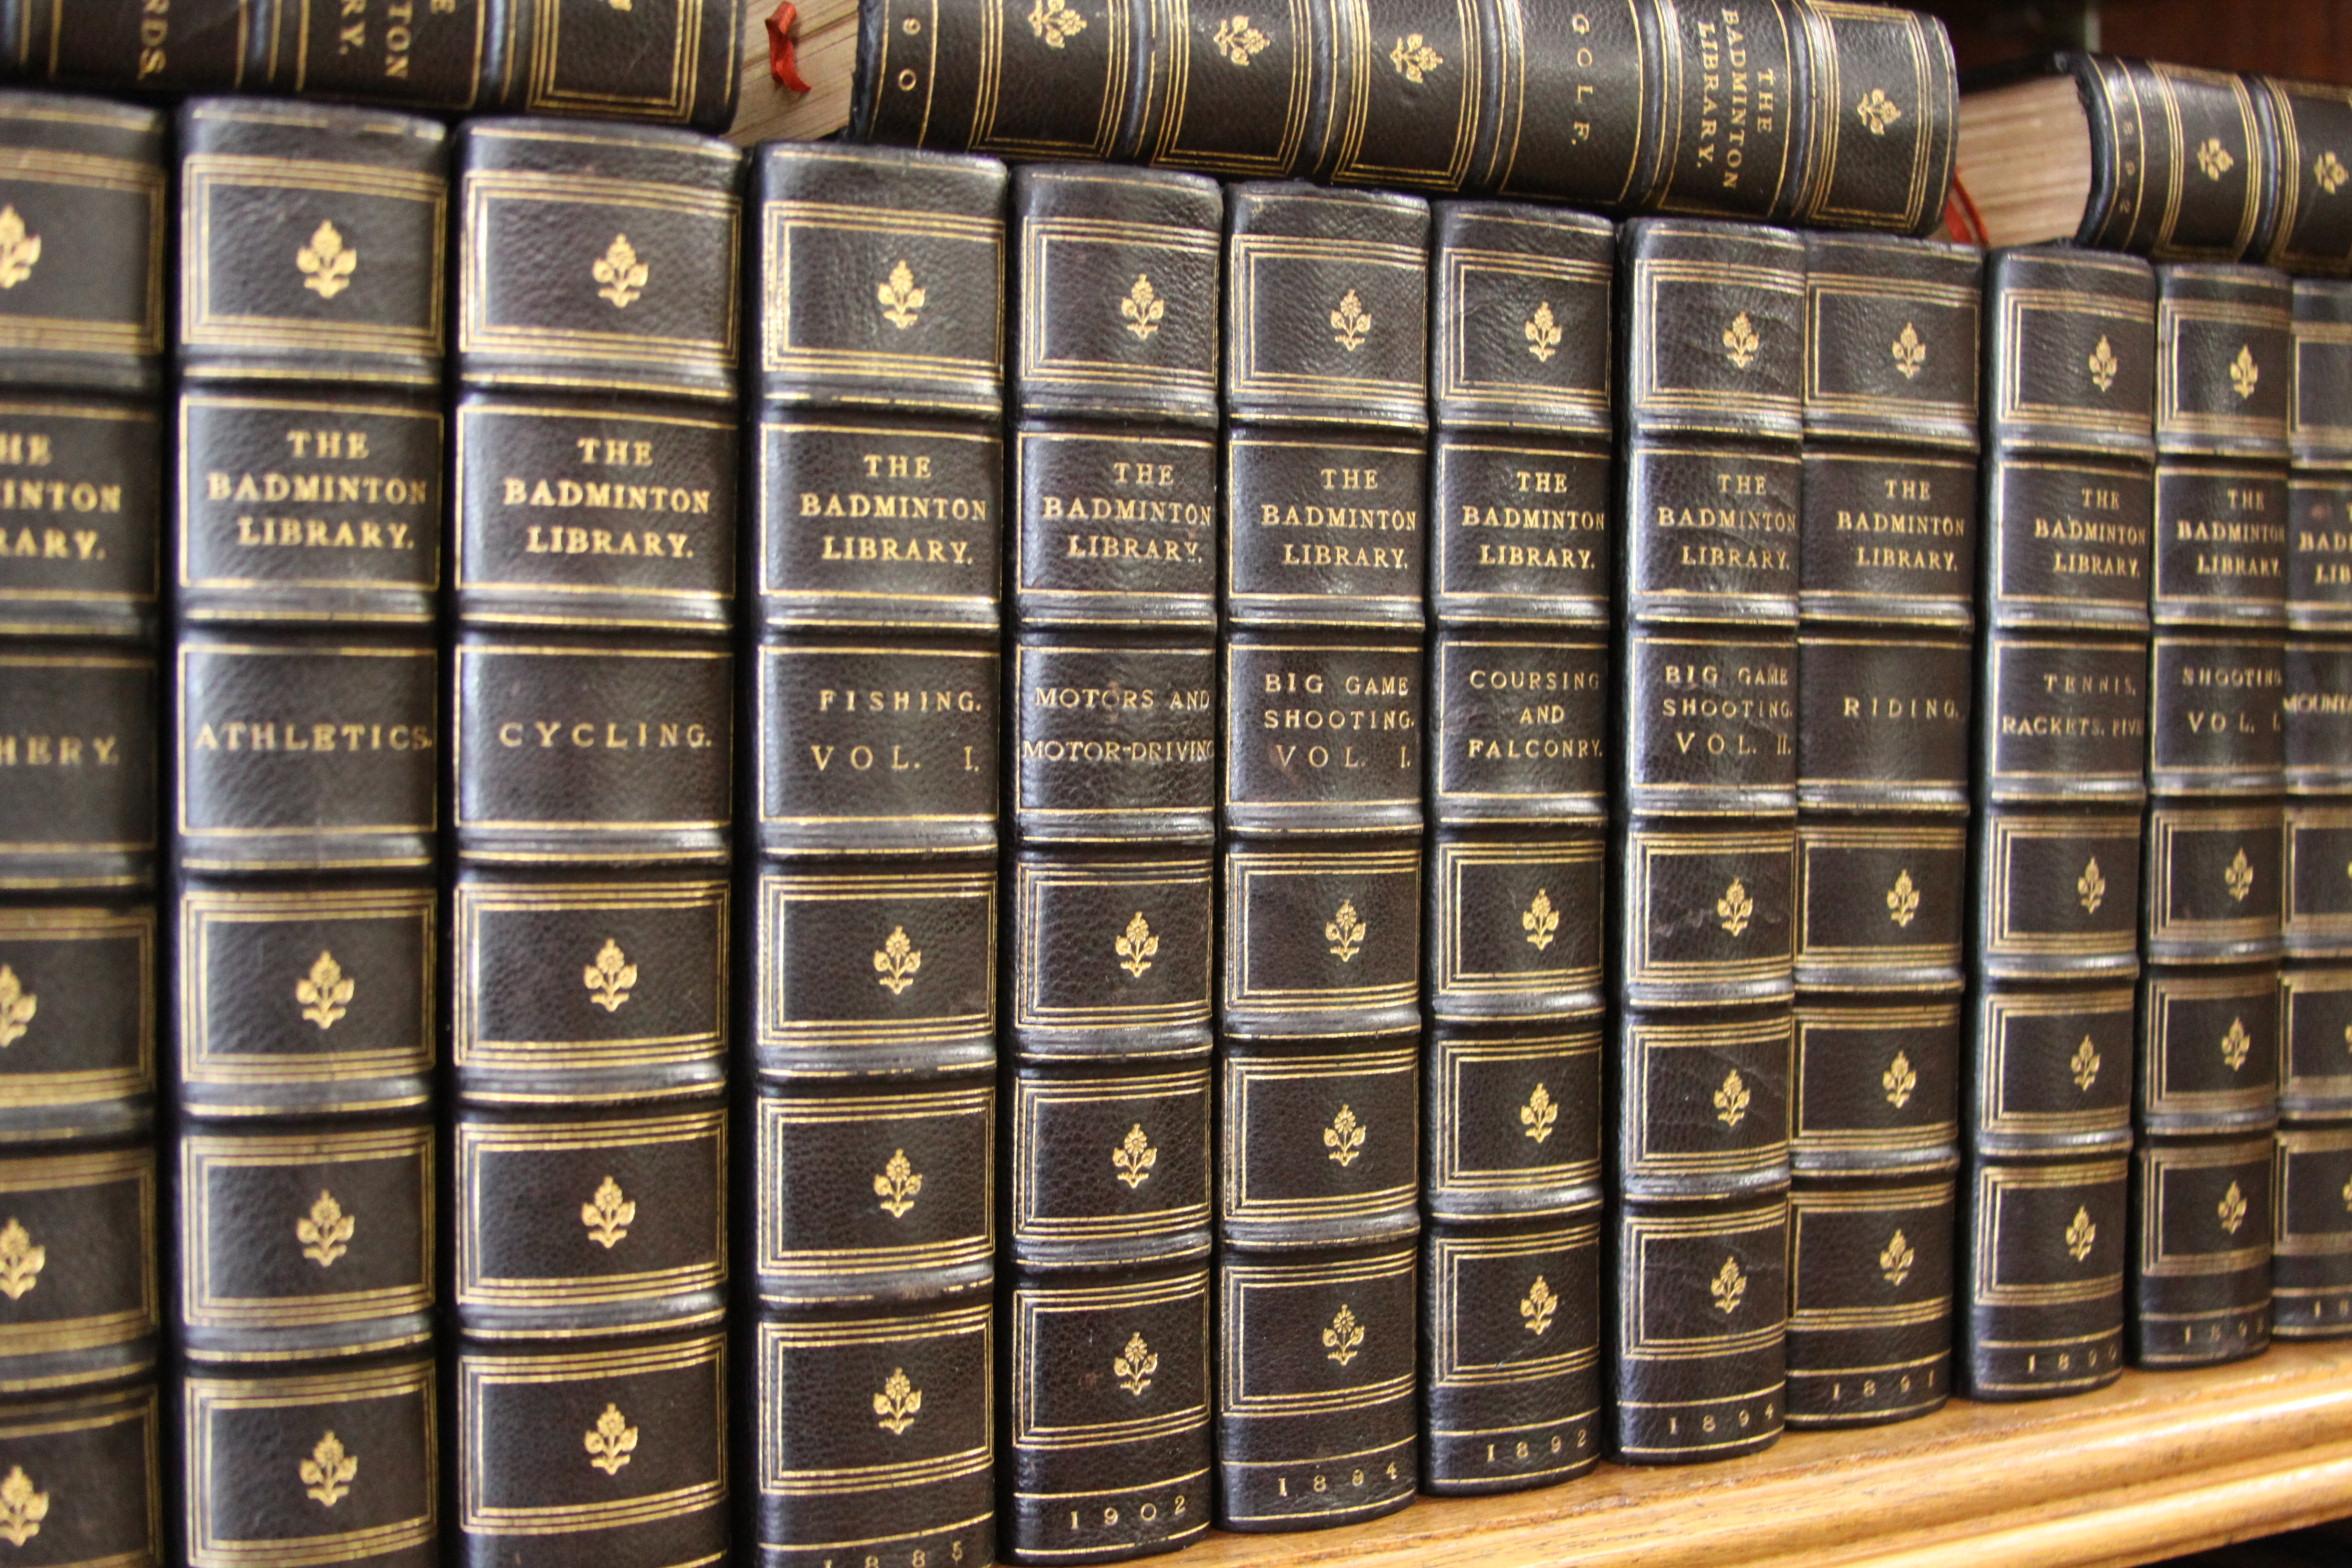 Twenty-eight volumes .Published: London, Longmans, Green and Company, circa 1892. The badminton Library collection of sport with various authors. Illustrated through-out set. Title include Skating, Rowing, Yachting, sea fishing, racing and